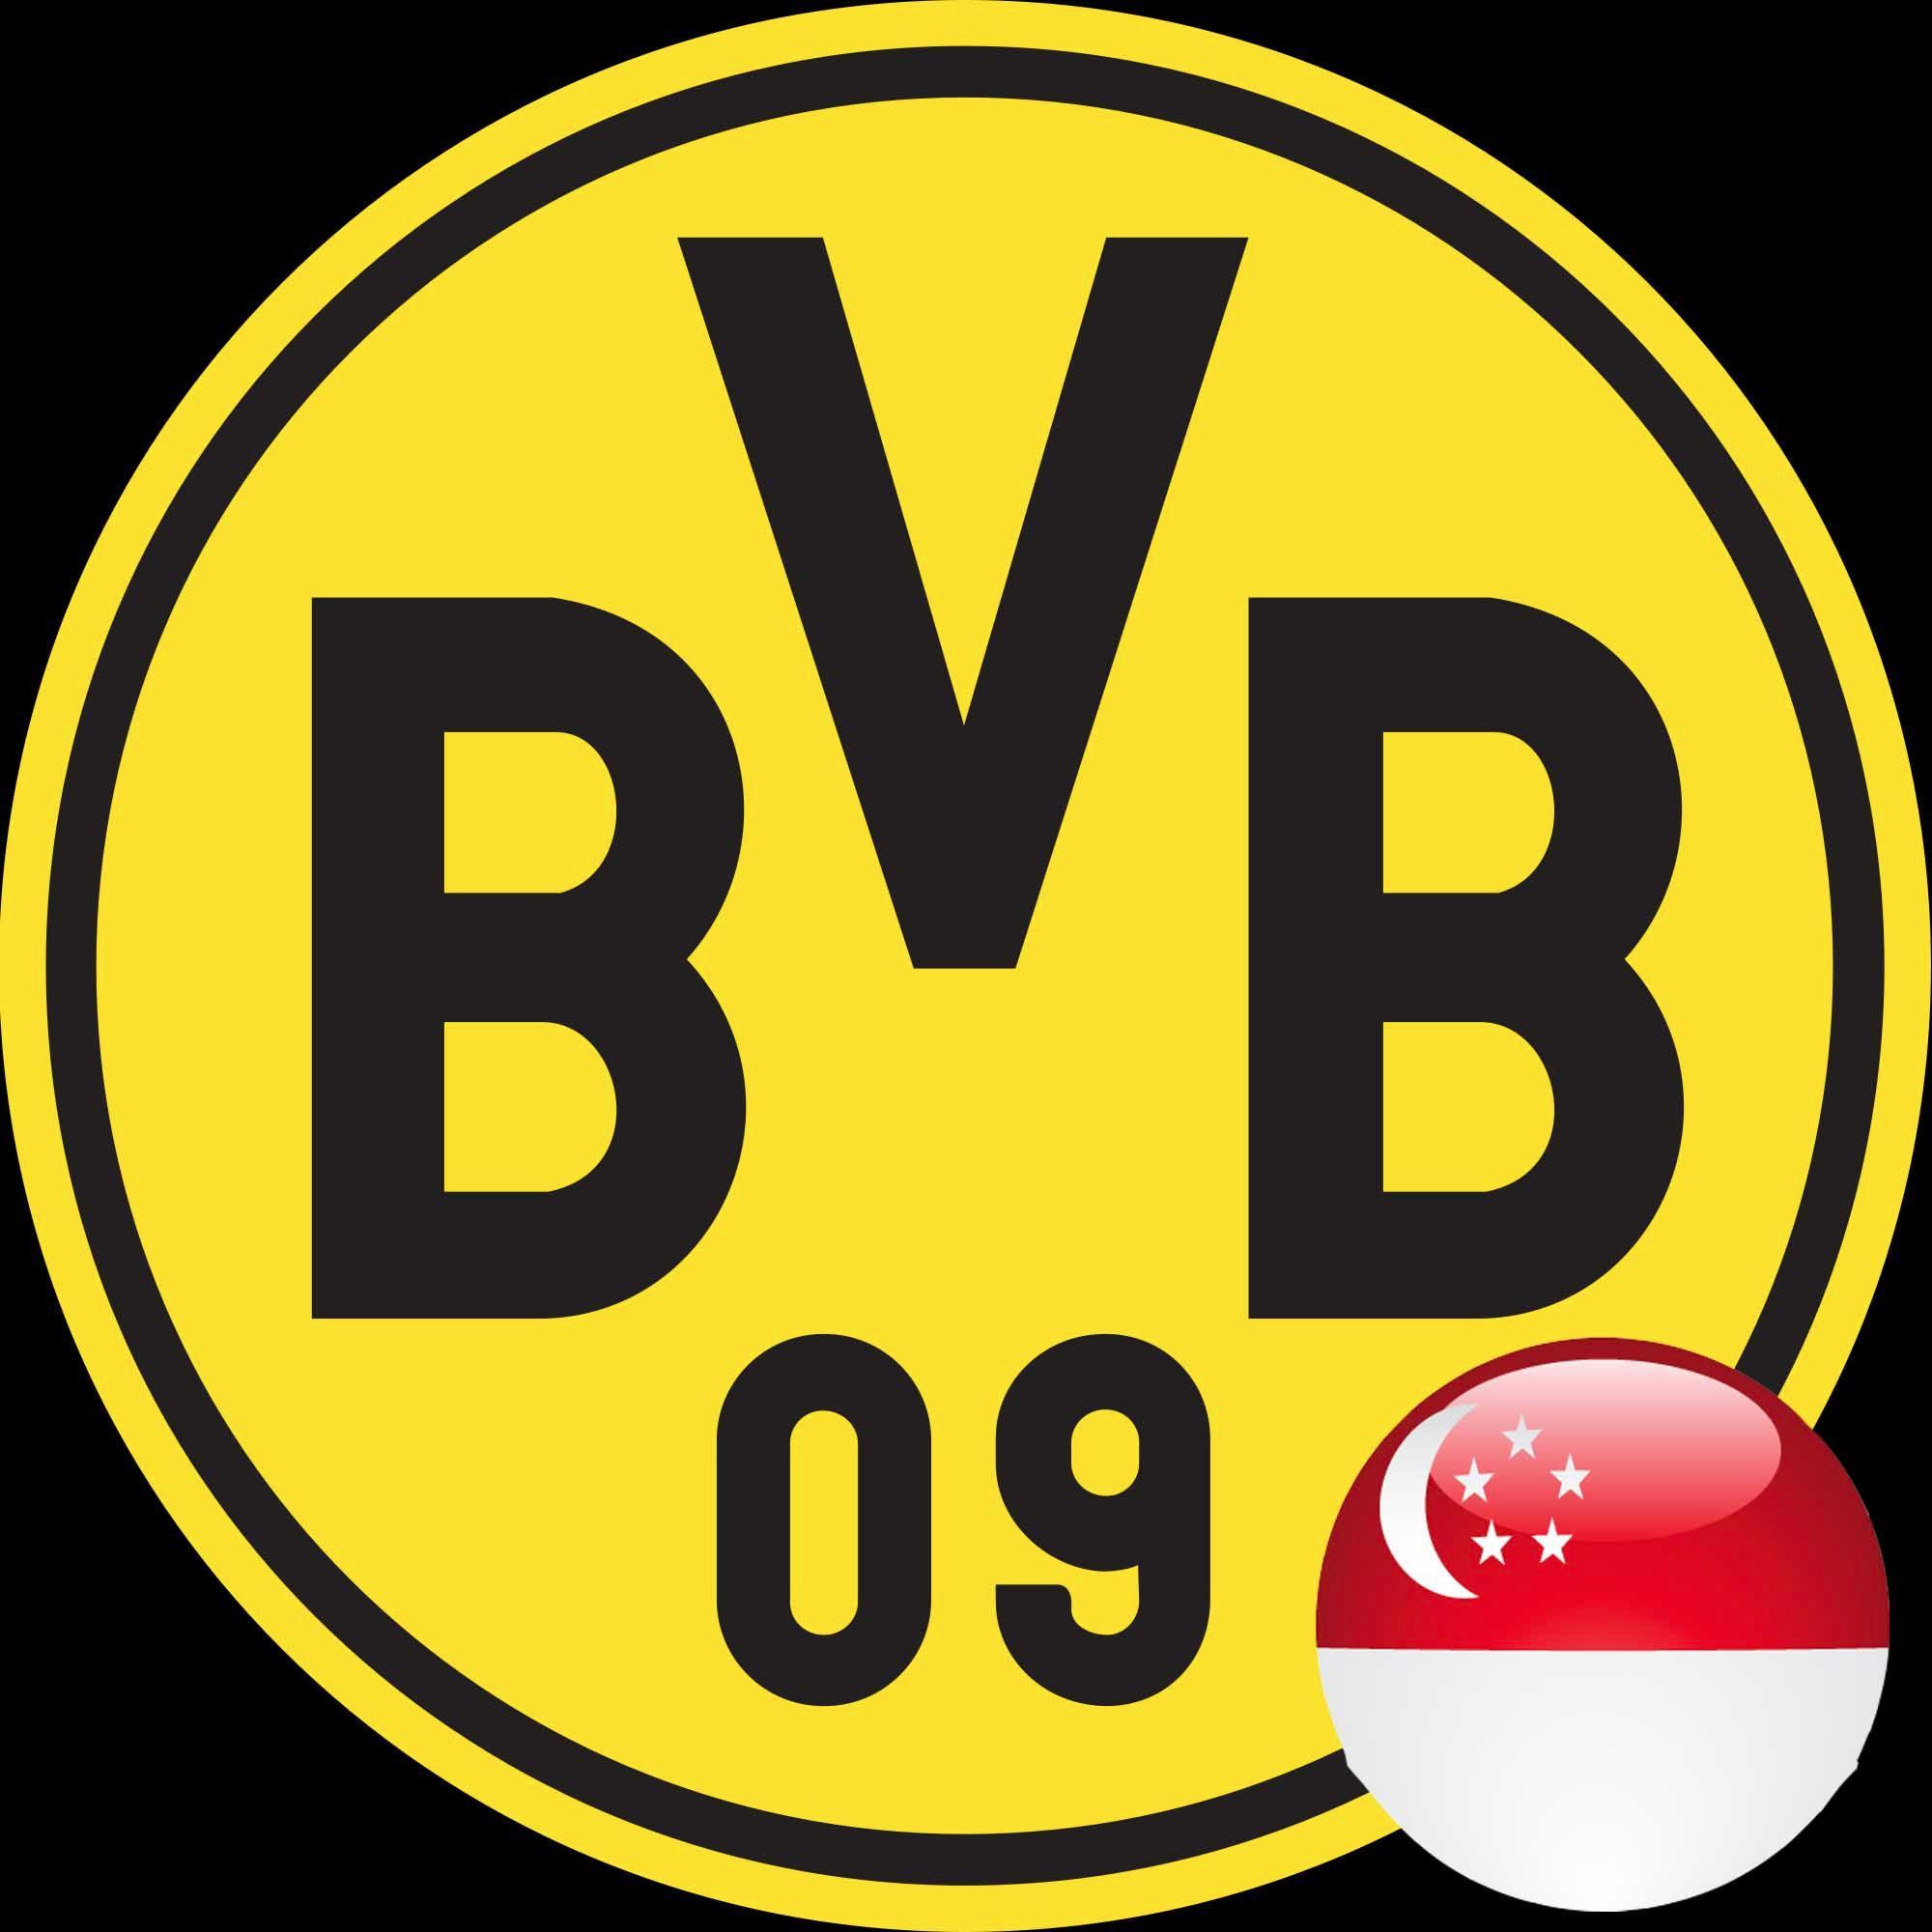 The Yellow Wall in the little Red Dot. bvbsg1909@gmail.com